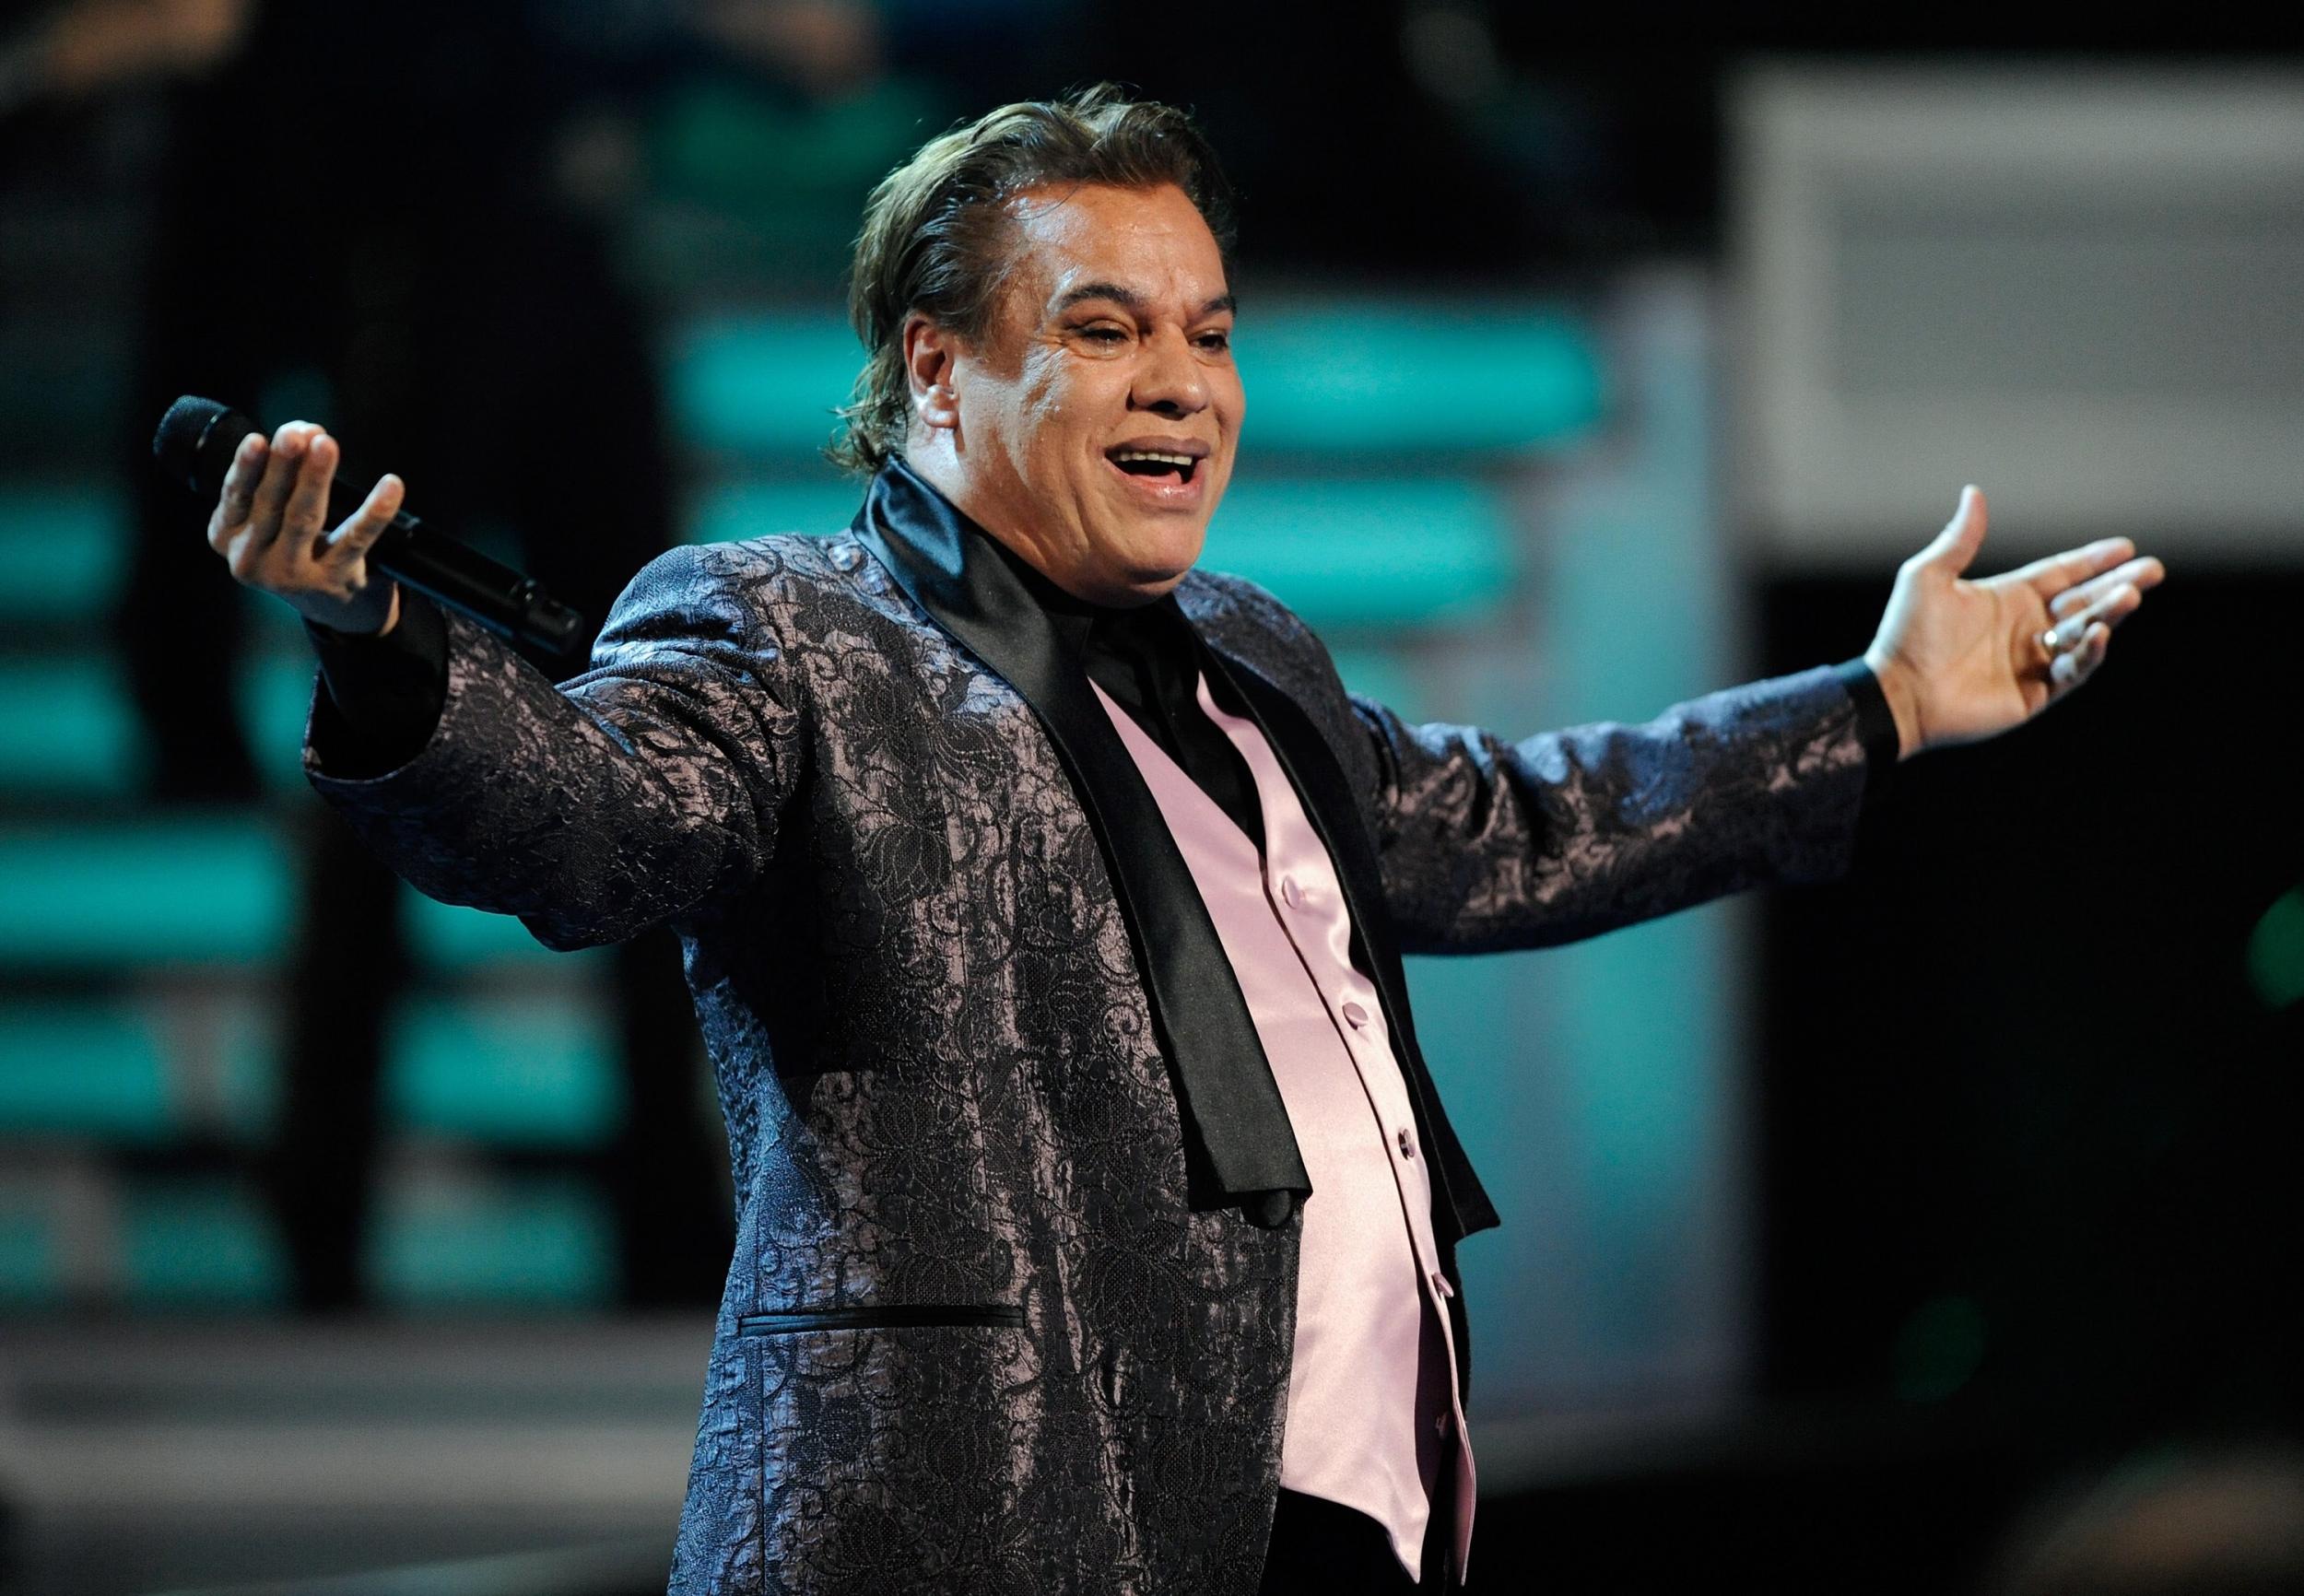 File: Juan Gabriel performs during the 10th Annual Latin GRAMMY Awards at the Mandalay Bay Events Center November 5, 2009 in Las Vegas, Nevada